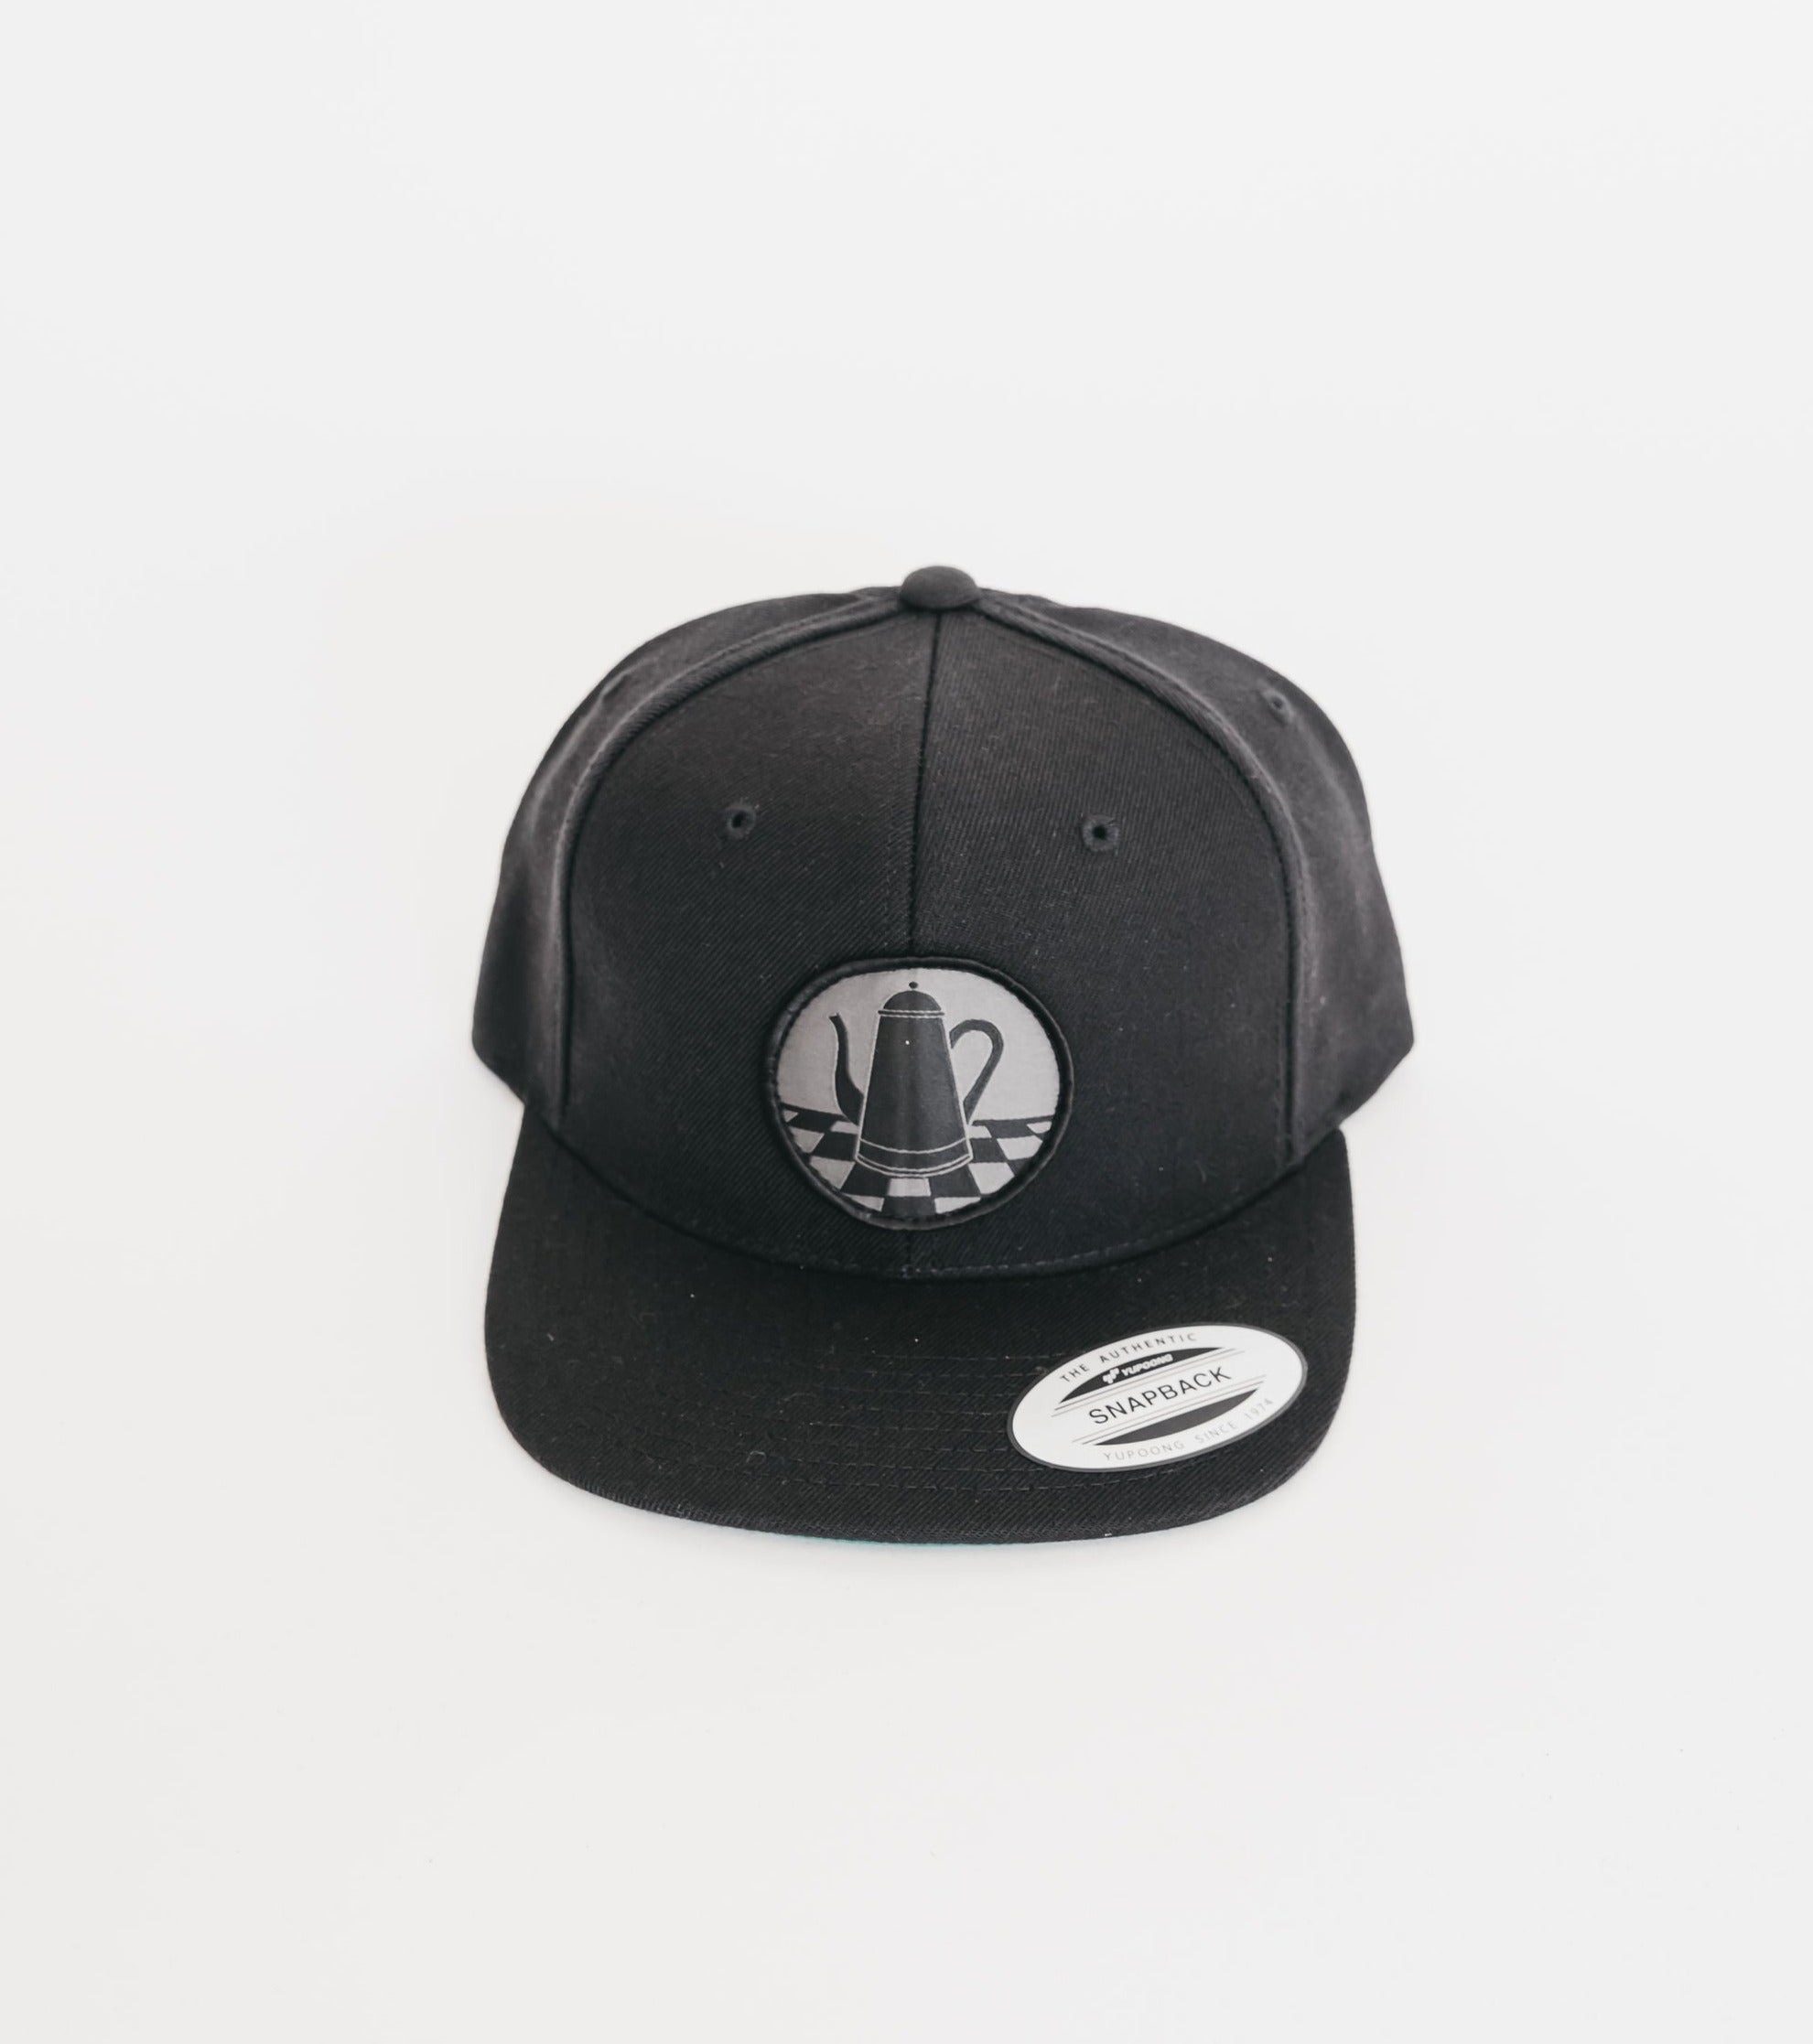 Blacked-Out Traditional Logo Snapback Hat - Black or Gray